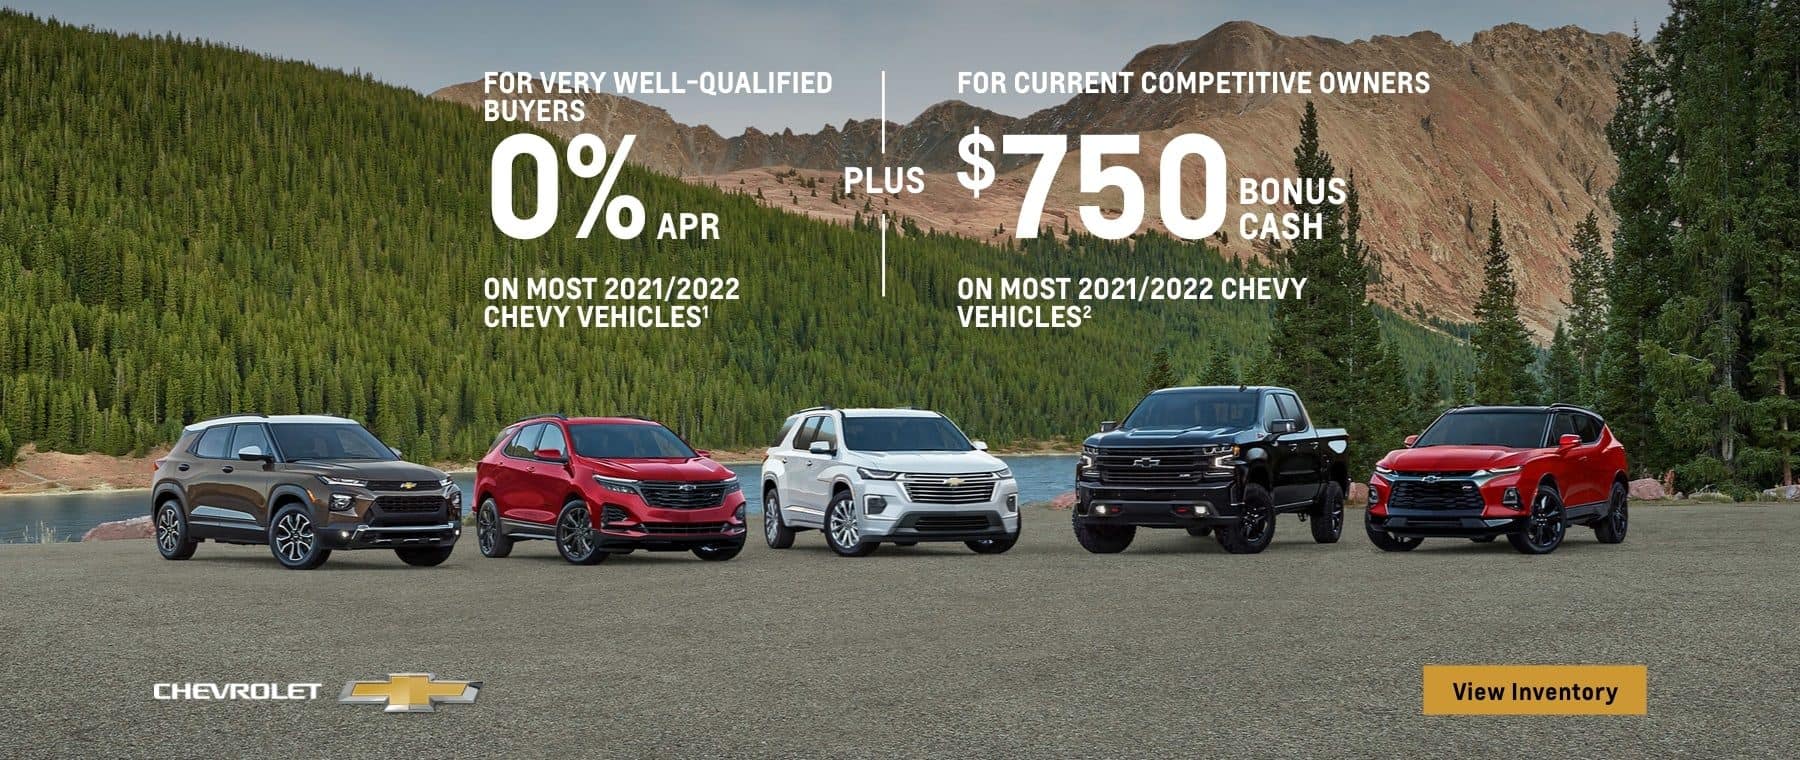 Step into the new year in a new Chevy. For very well-qualified buyers 0% APR on most 2021/2022 Chevy vehicles. Plus, for current competitive owners $750 bonus cash on most 2021/2022 Chevy vehicles.